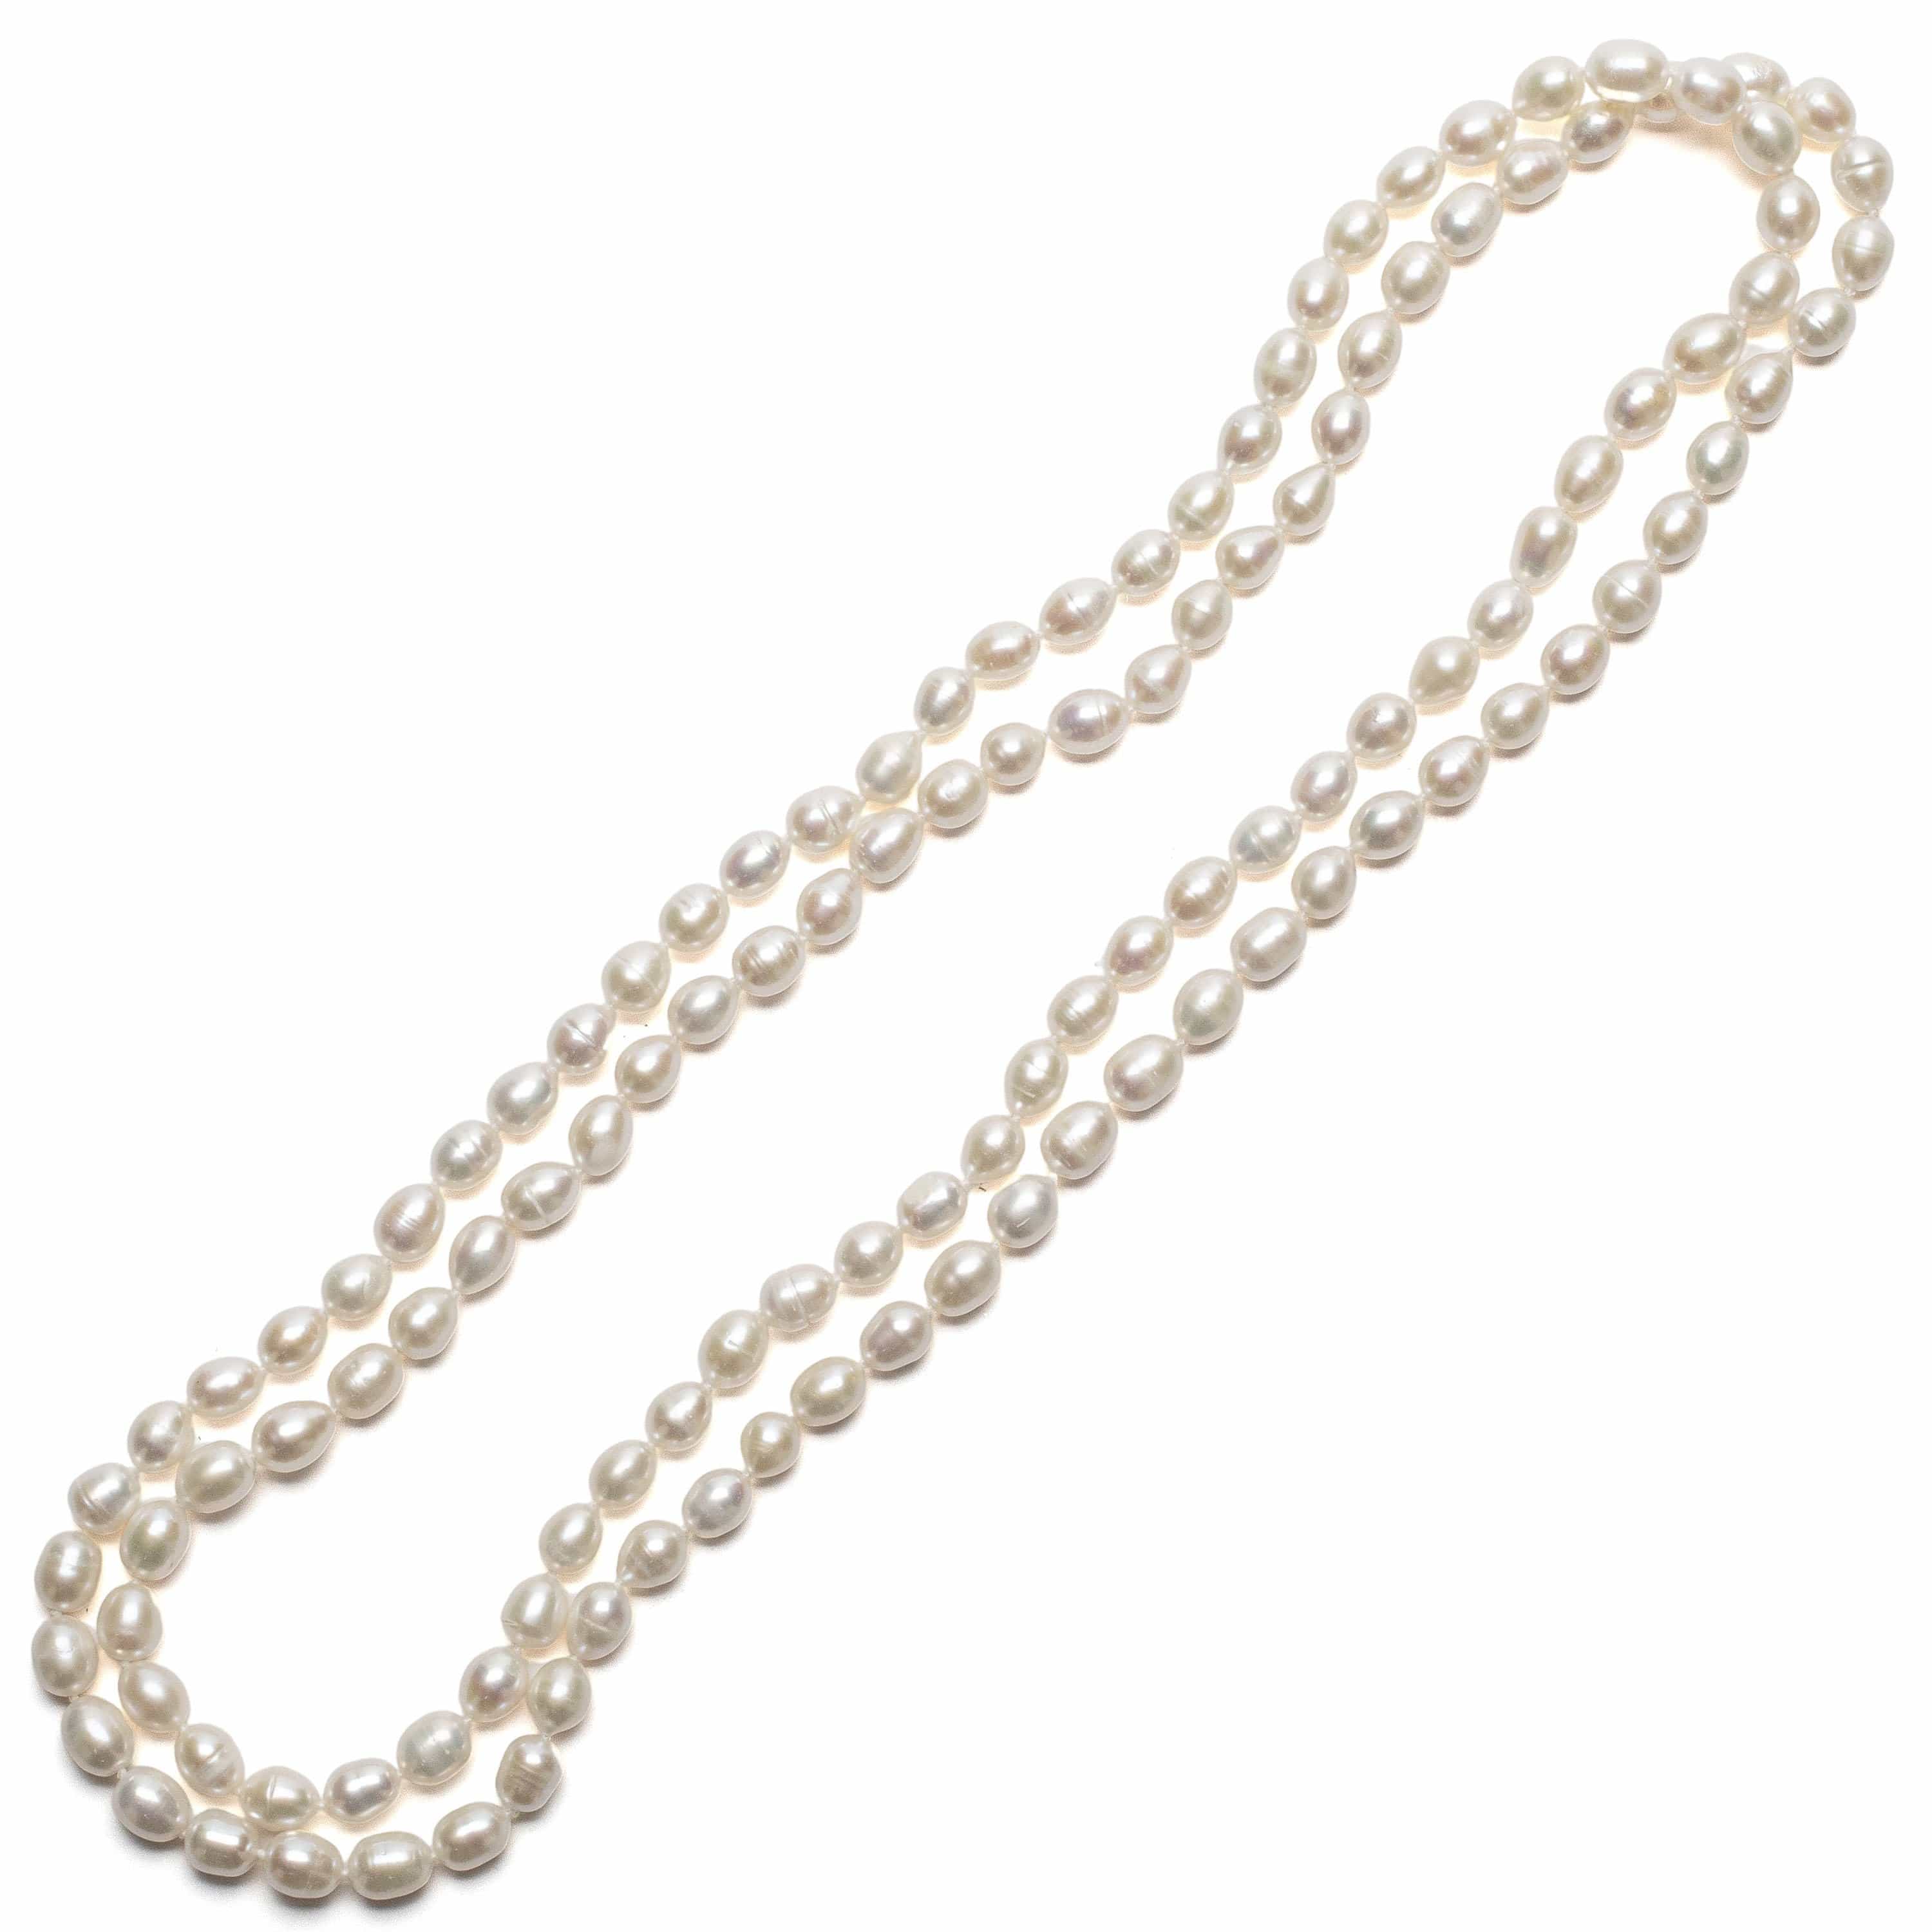 56 Natural Fresh-Water Cultured Pearl Necklace 